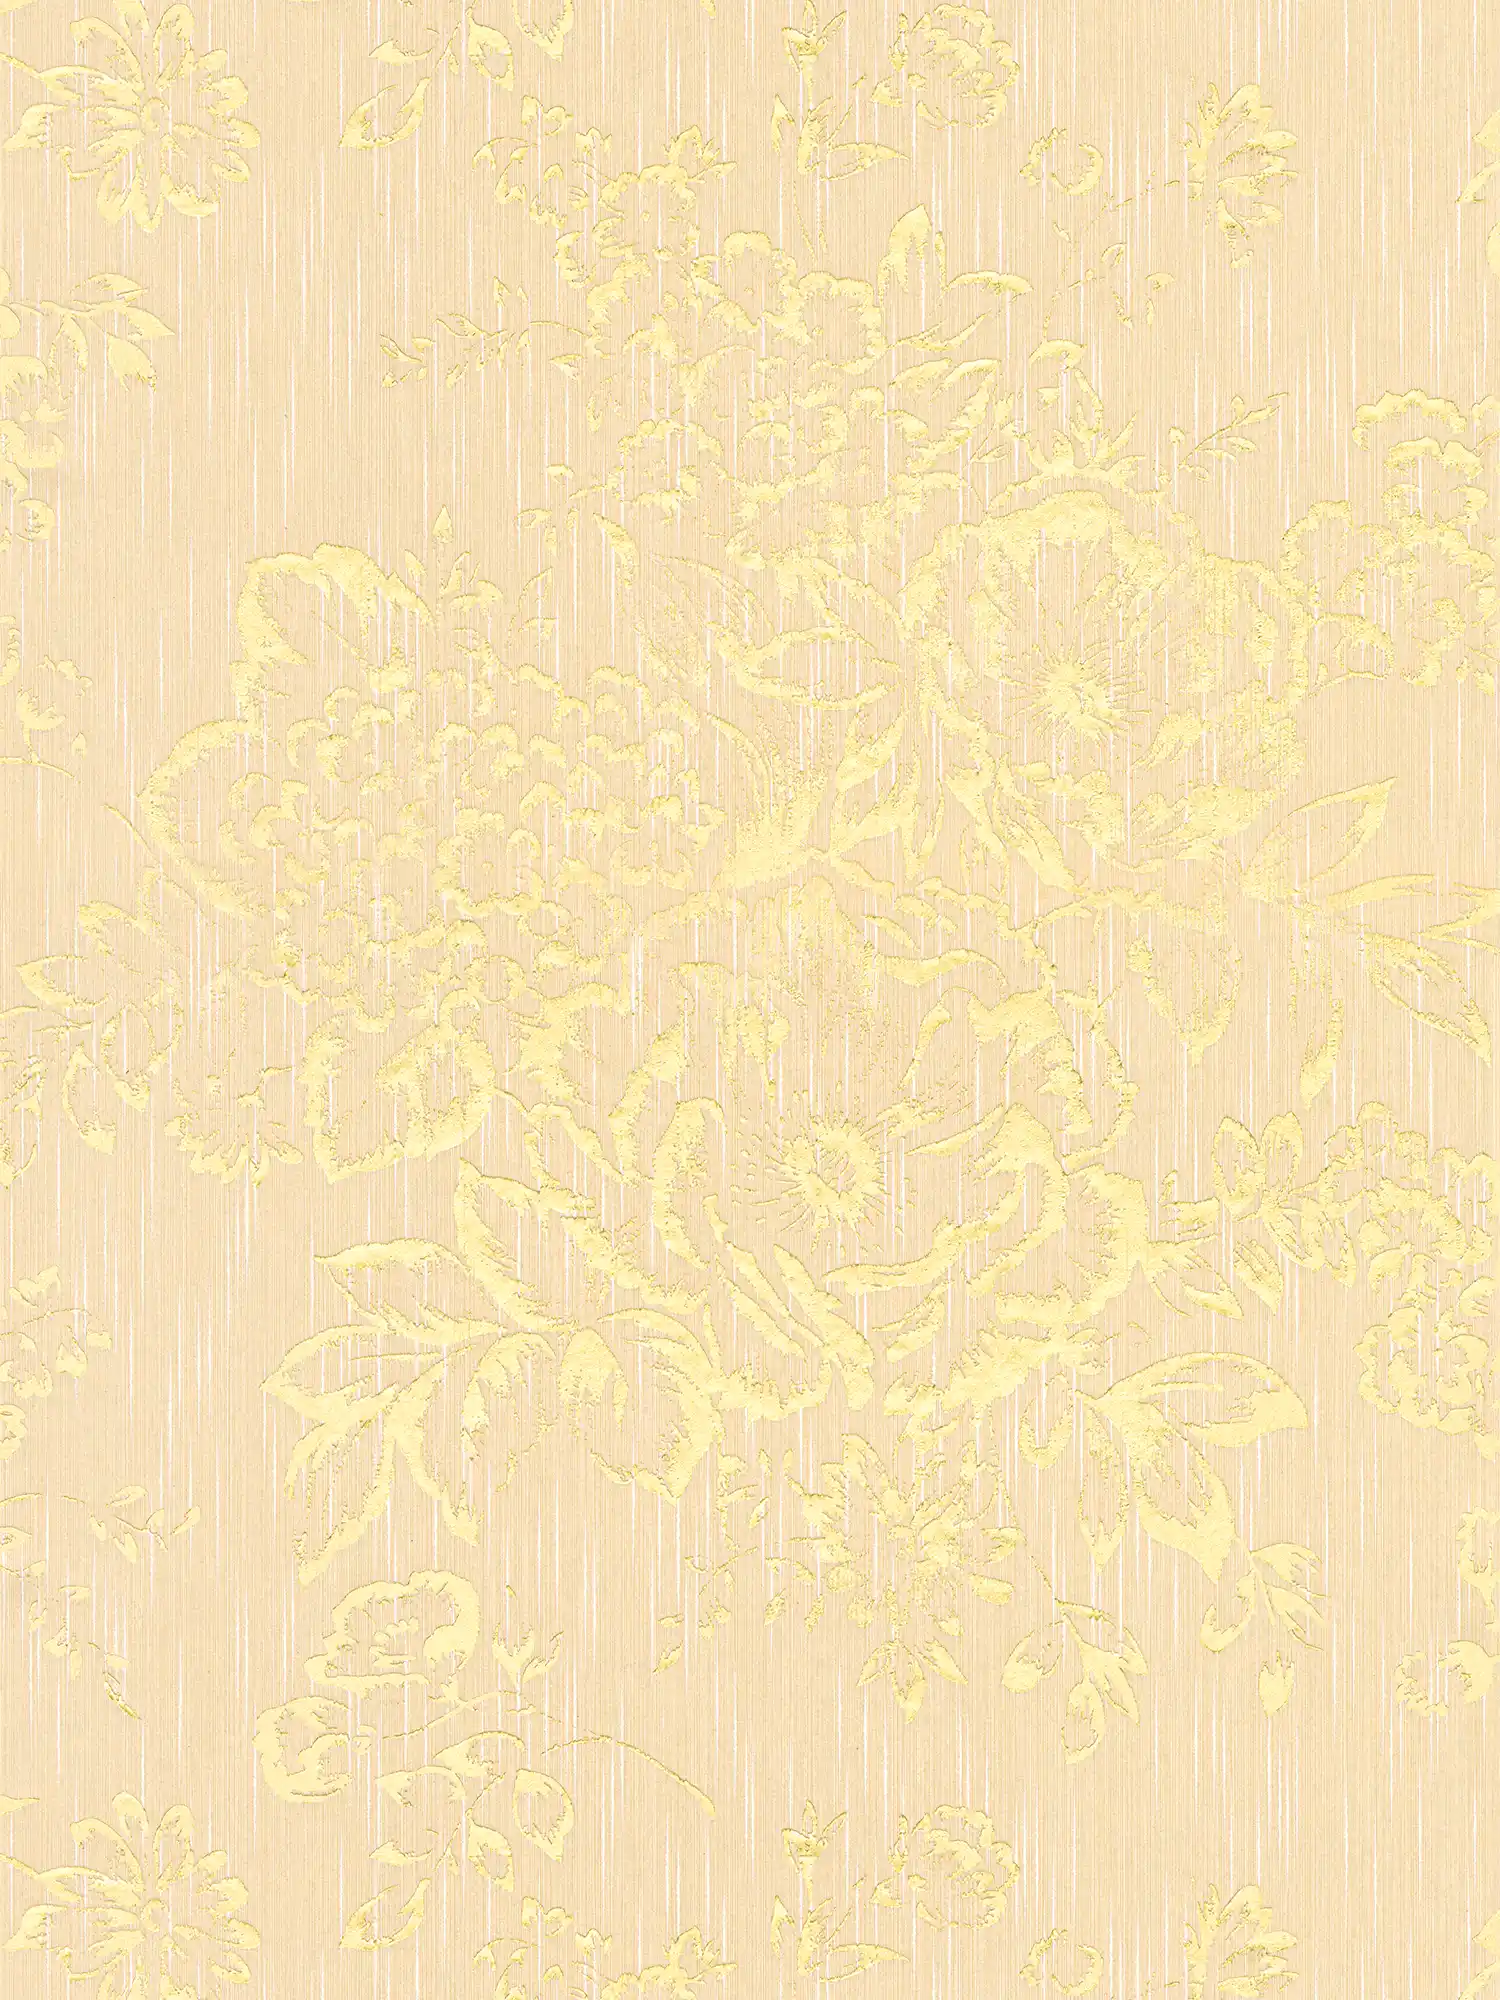 Textured wallpaper with gold floral pattern - gold, cream
